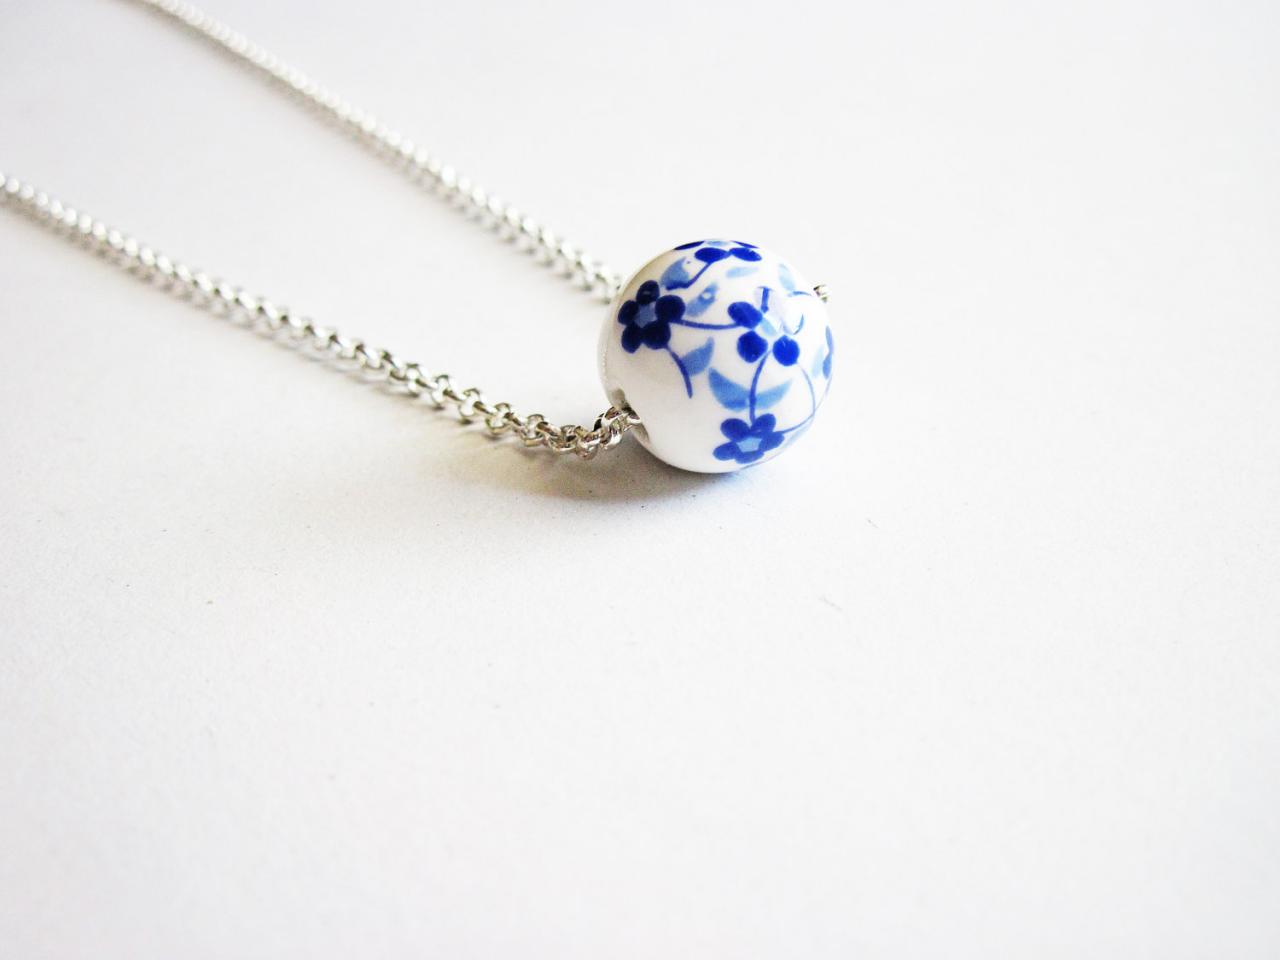 Porcelain Necklace, Solitaire Necklace, Plain Chain, Single Bead On Silver Chain, Japanese Chinese Inspired Necklace, Beaded Necklace, Short